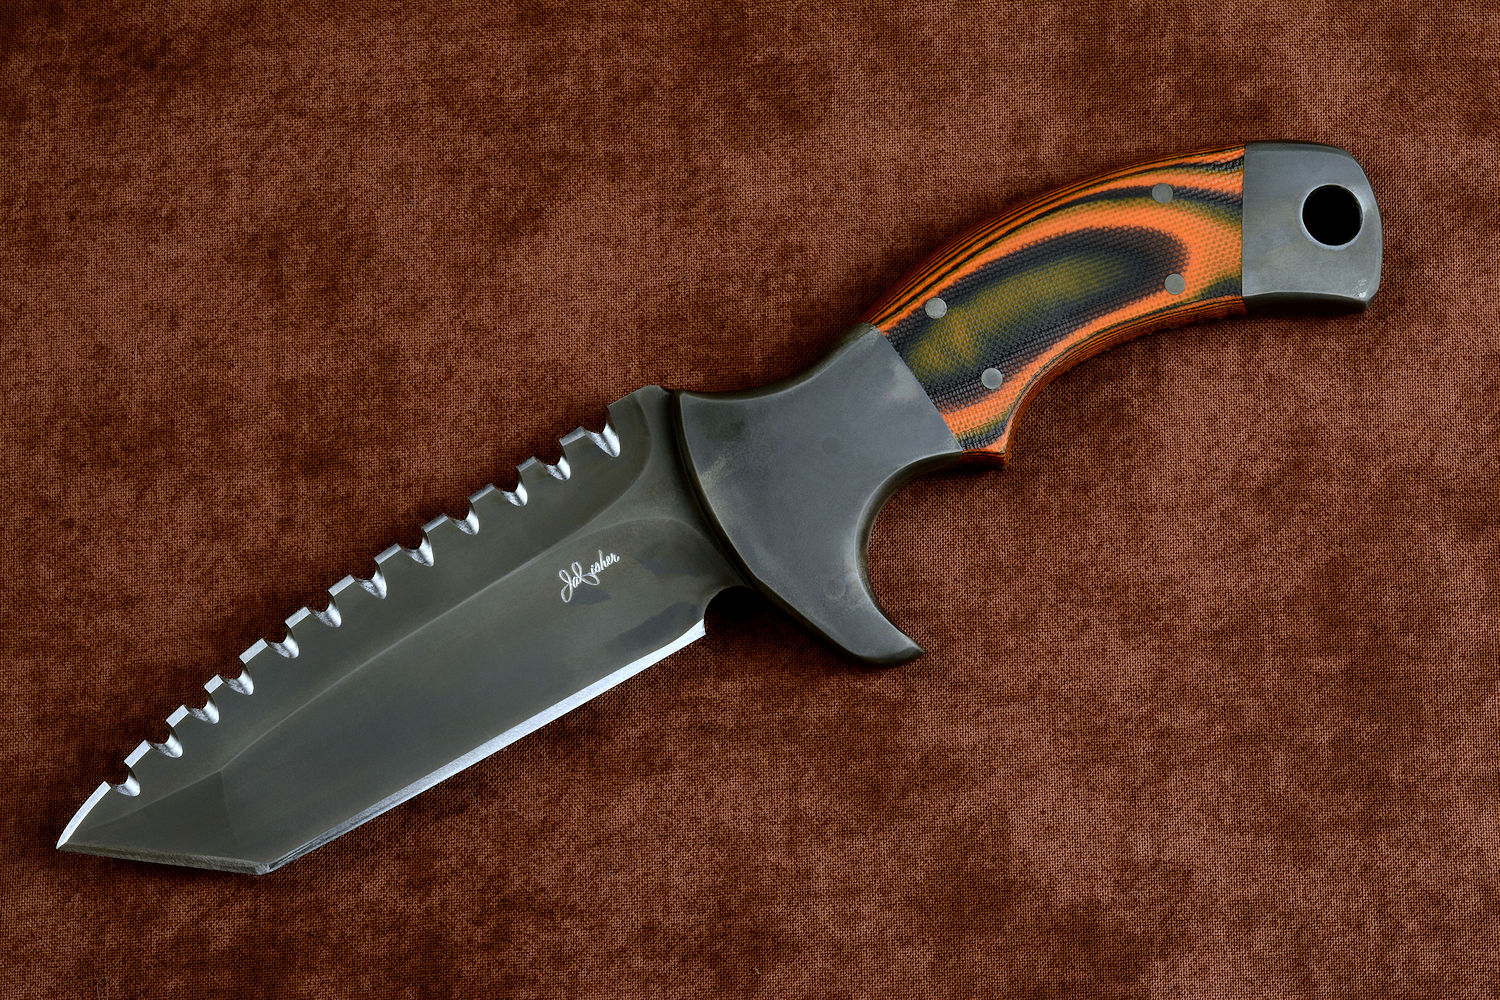 "Krag" tactical, counterterrorism, crossver knife, obverse side view in ATS-34 high molybdenum martensitic stainless steel blade, 304 stainless steel bolsters, multicolored tortoiseshell  G10 fiberglass/epoxy composite handle, hybrid tension tab-locking sheath in kydex, anodized aluminum, black oxide stainless steel and anodized titanium